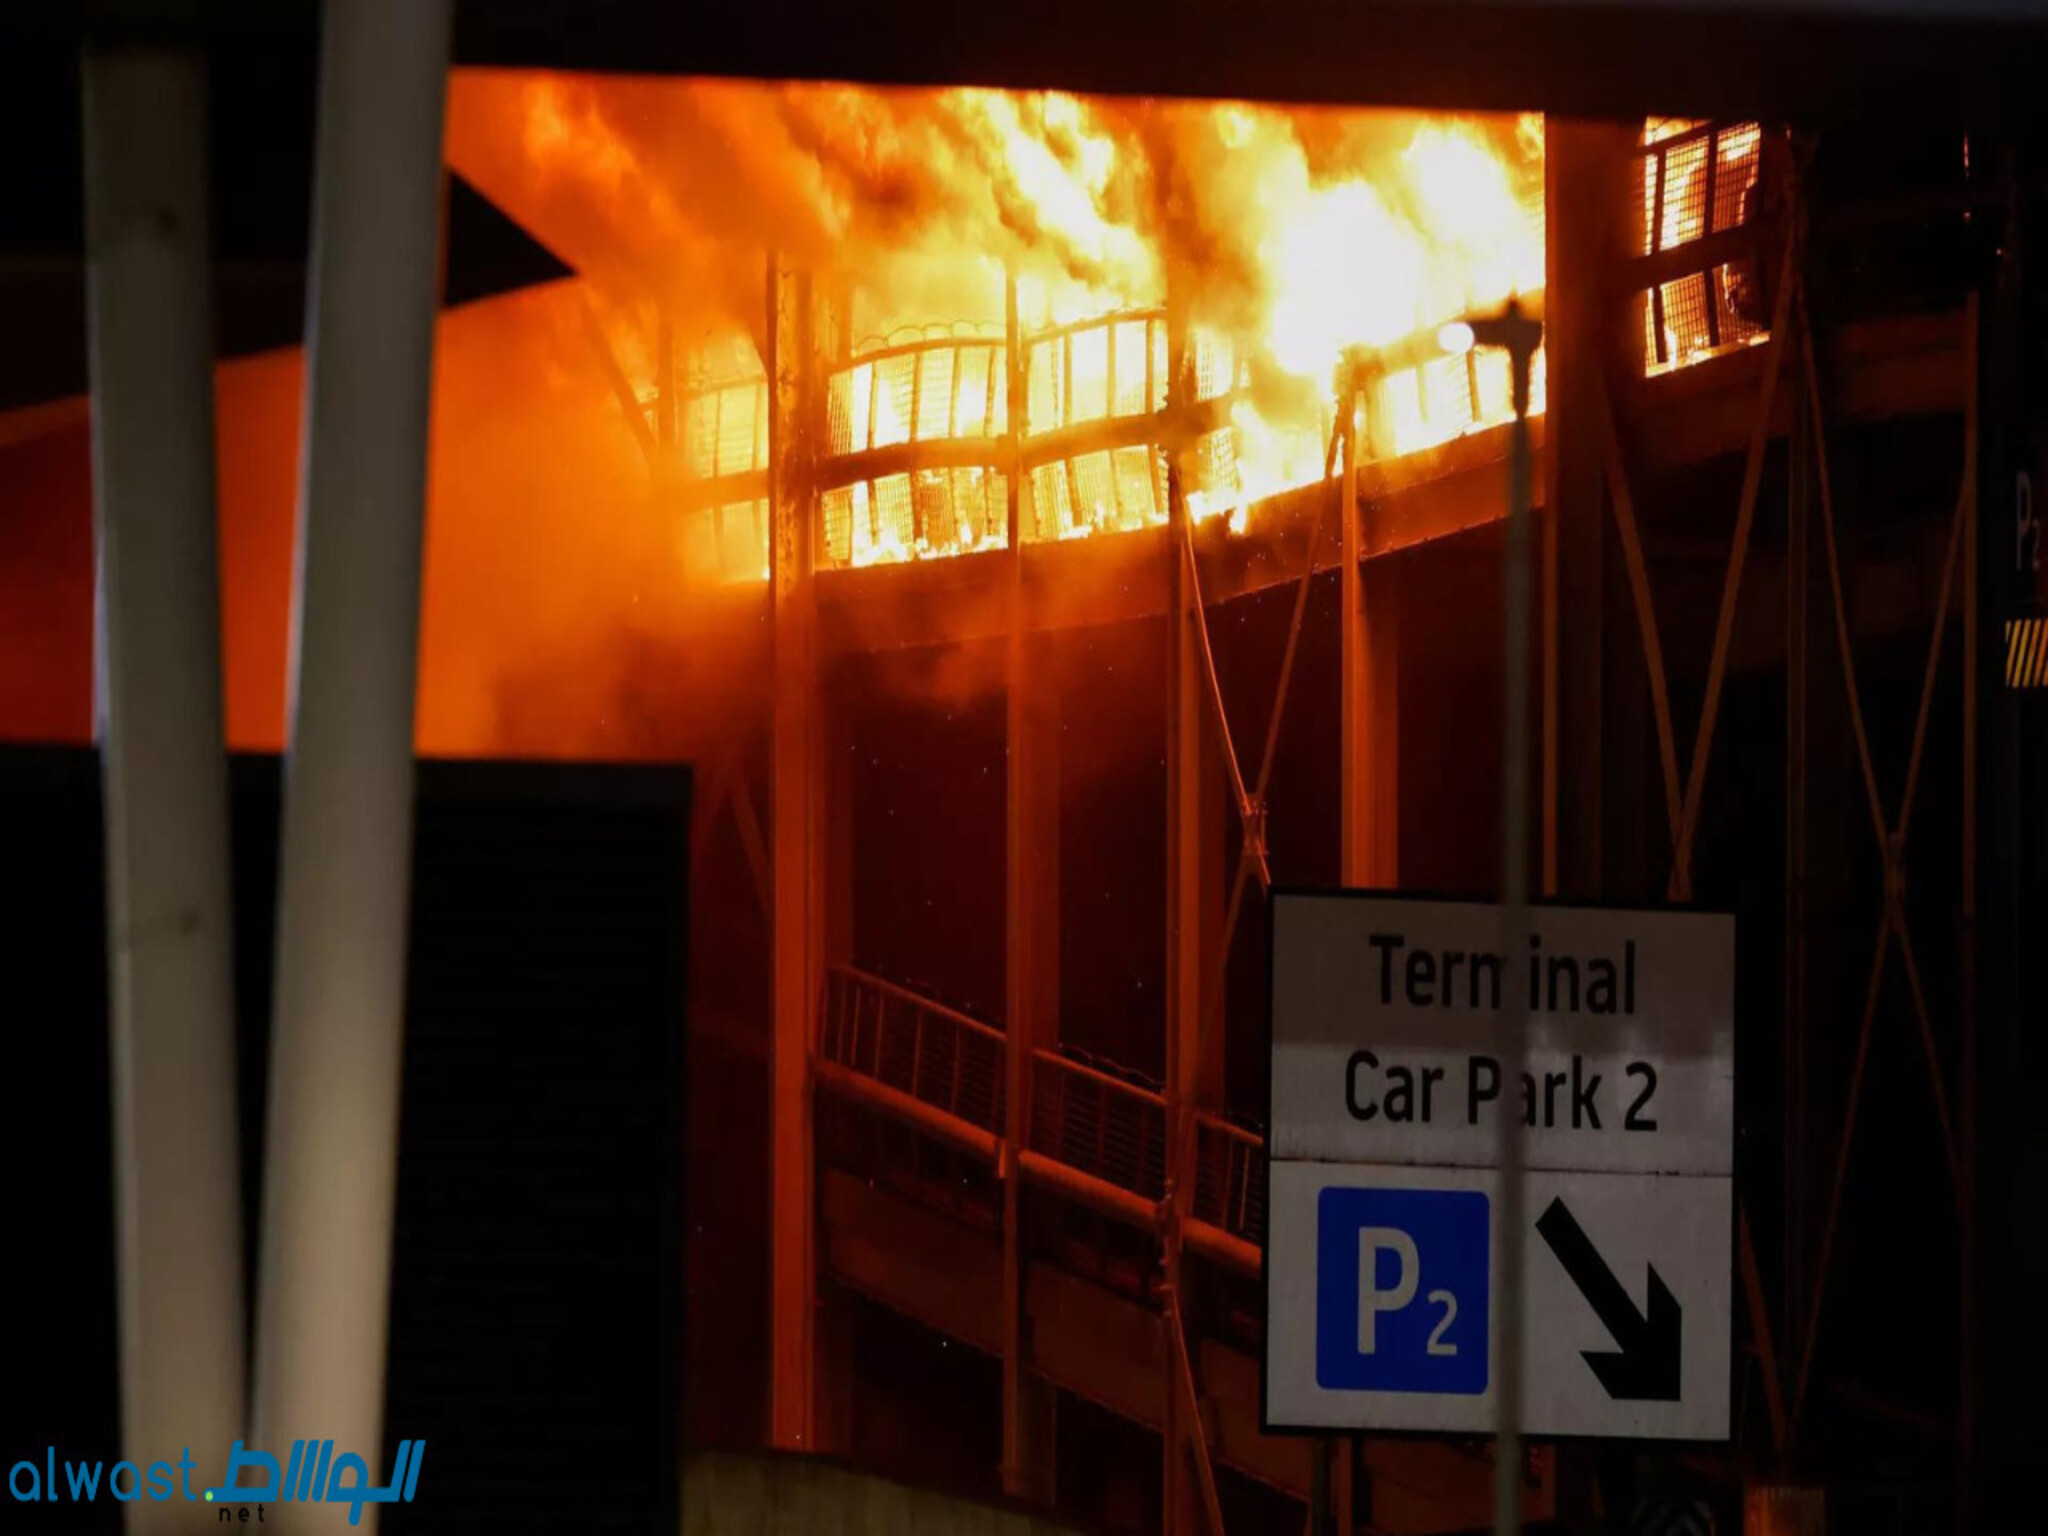 London Luton Airport Suspends All Flights Due to Major Fire